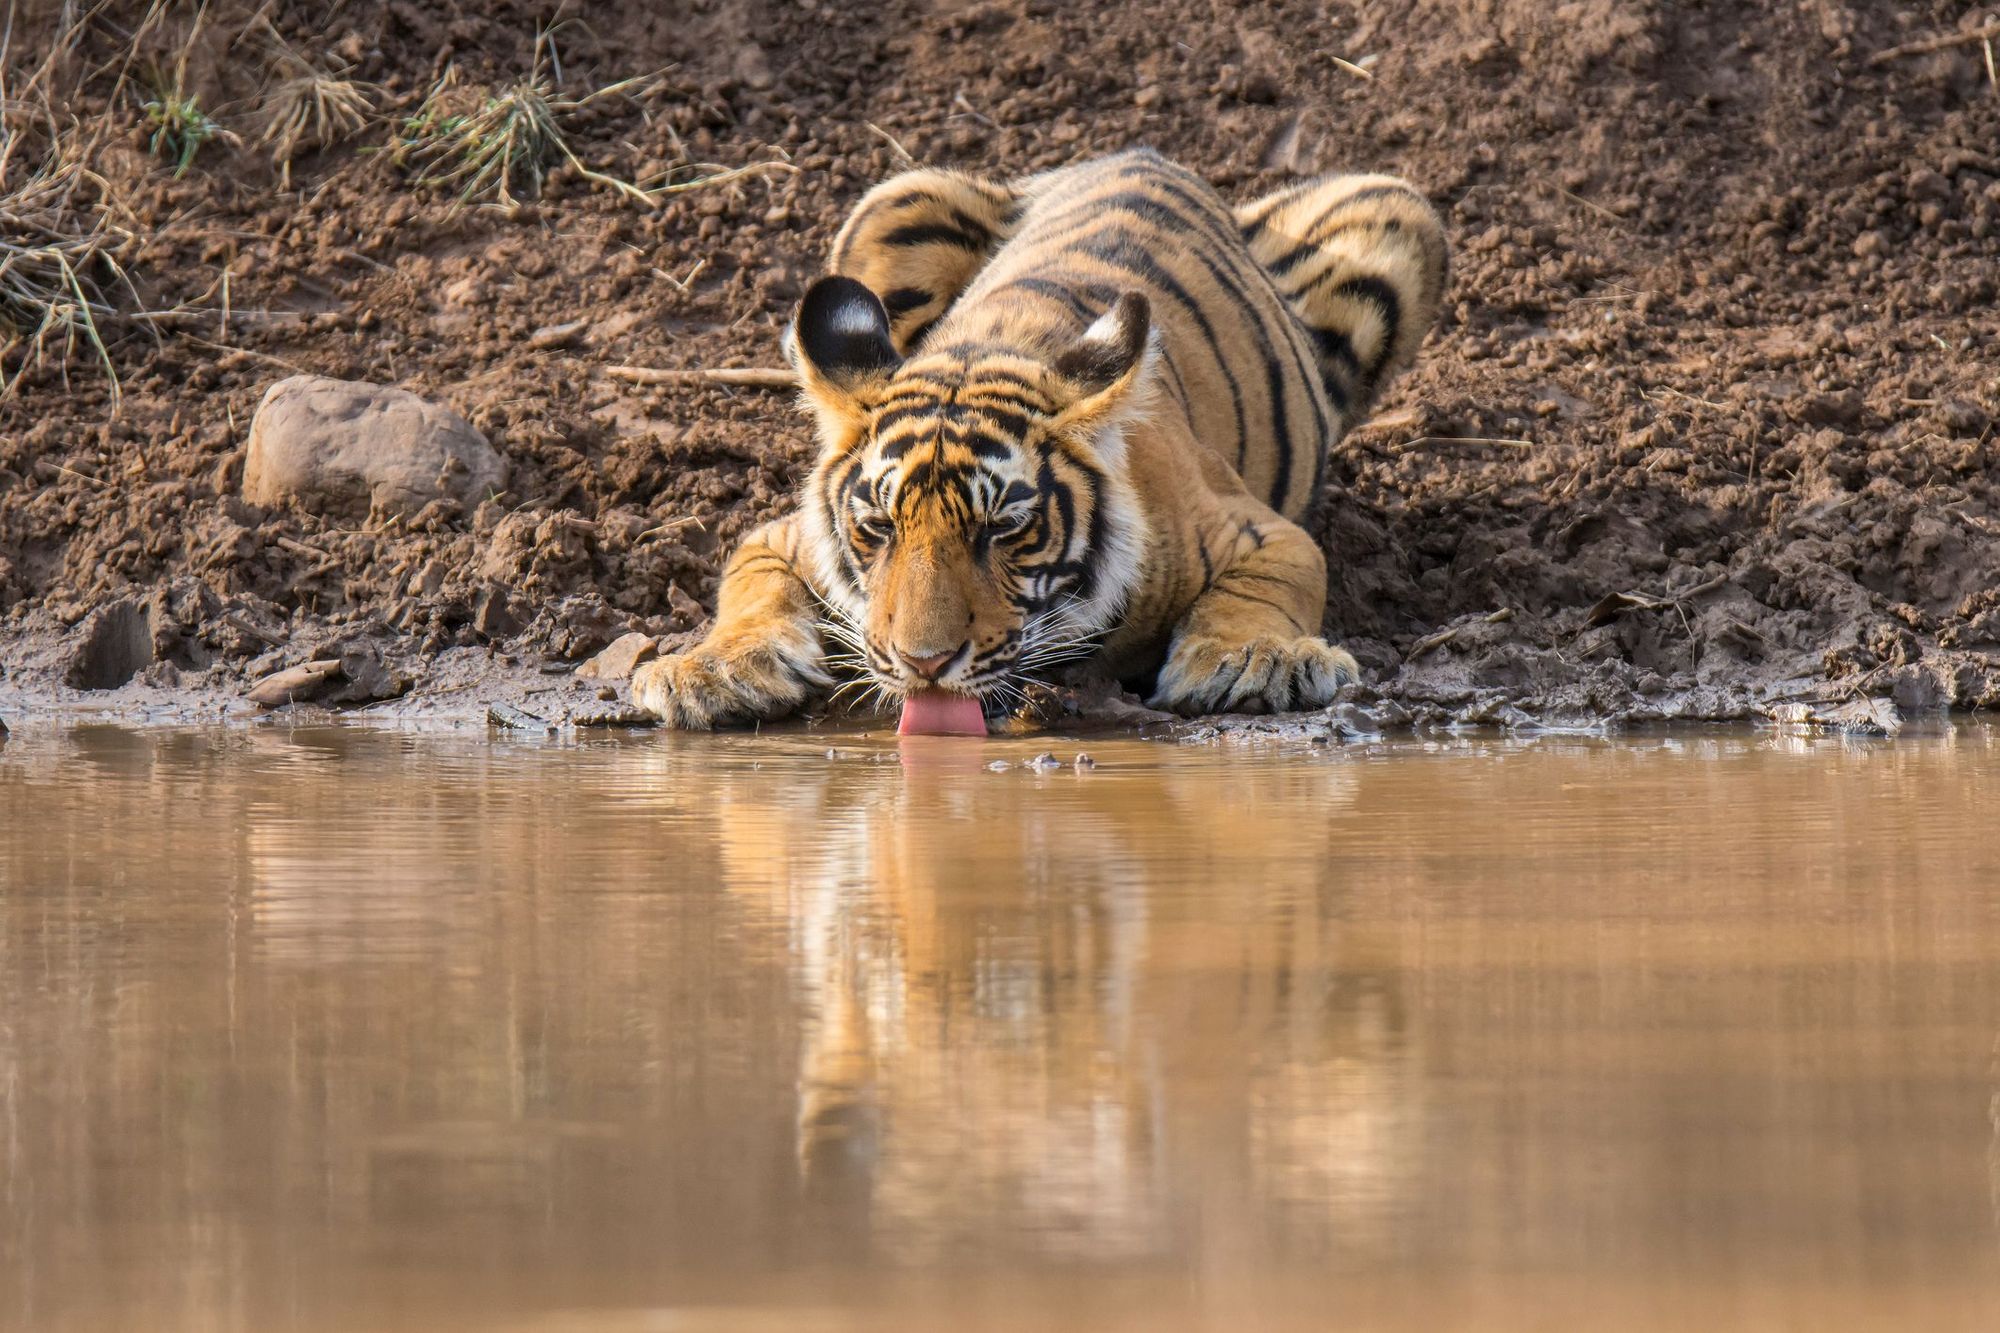 A Bengal tiger drinking at a water hole in Ranthambore National Park.